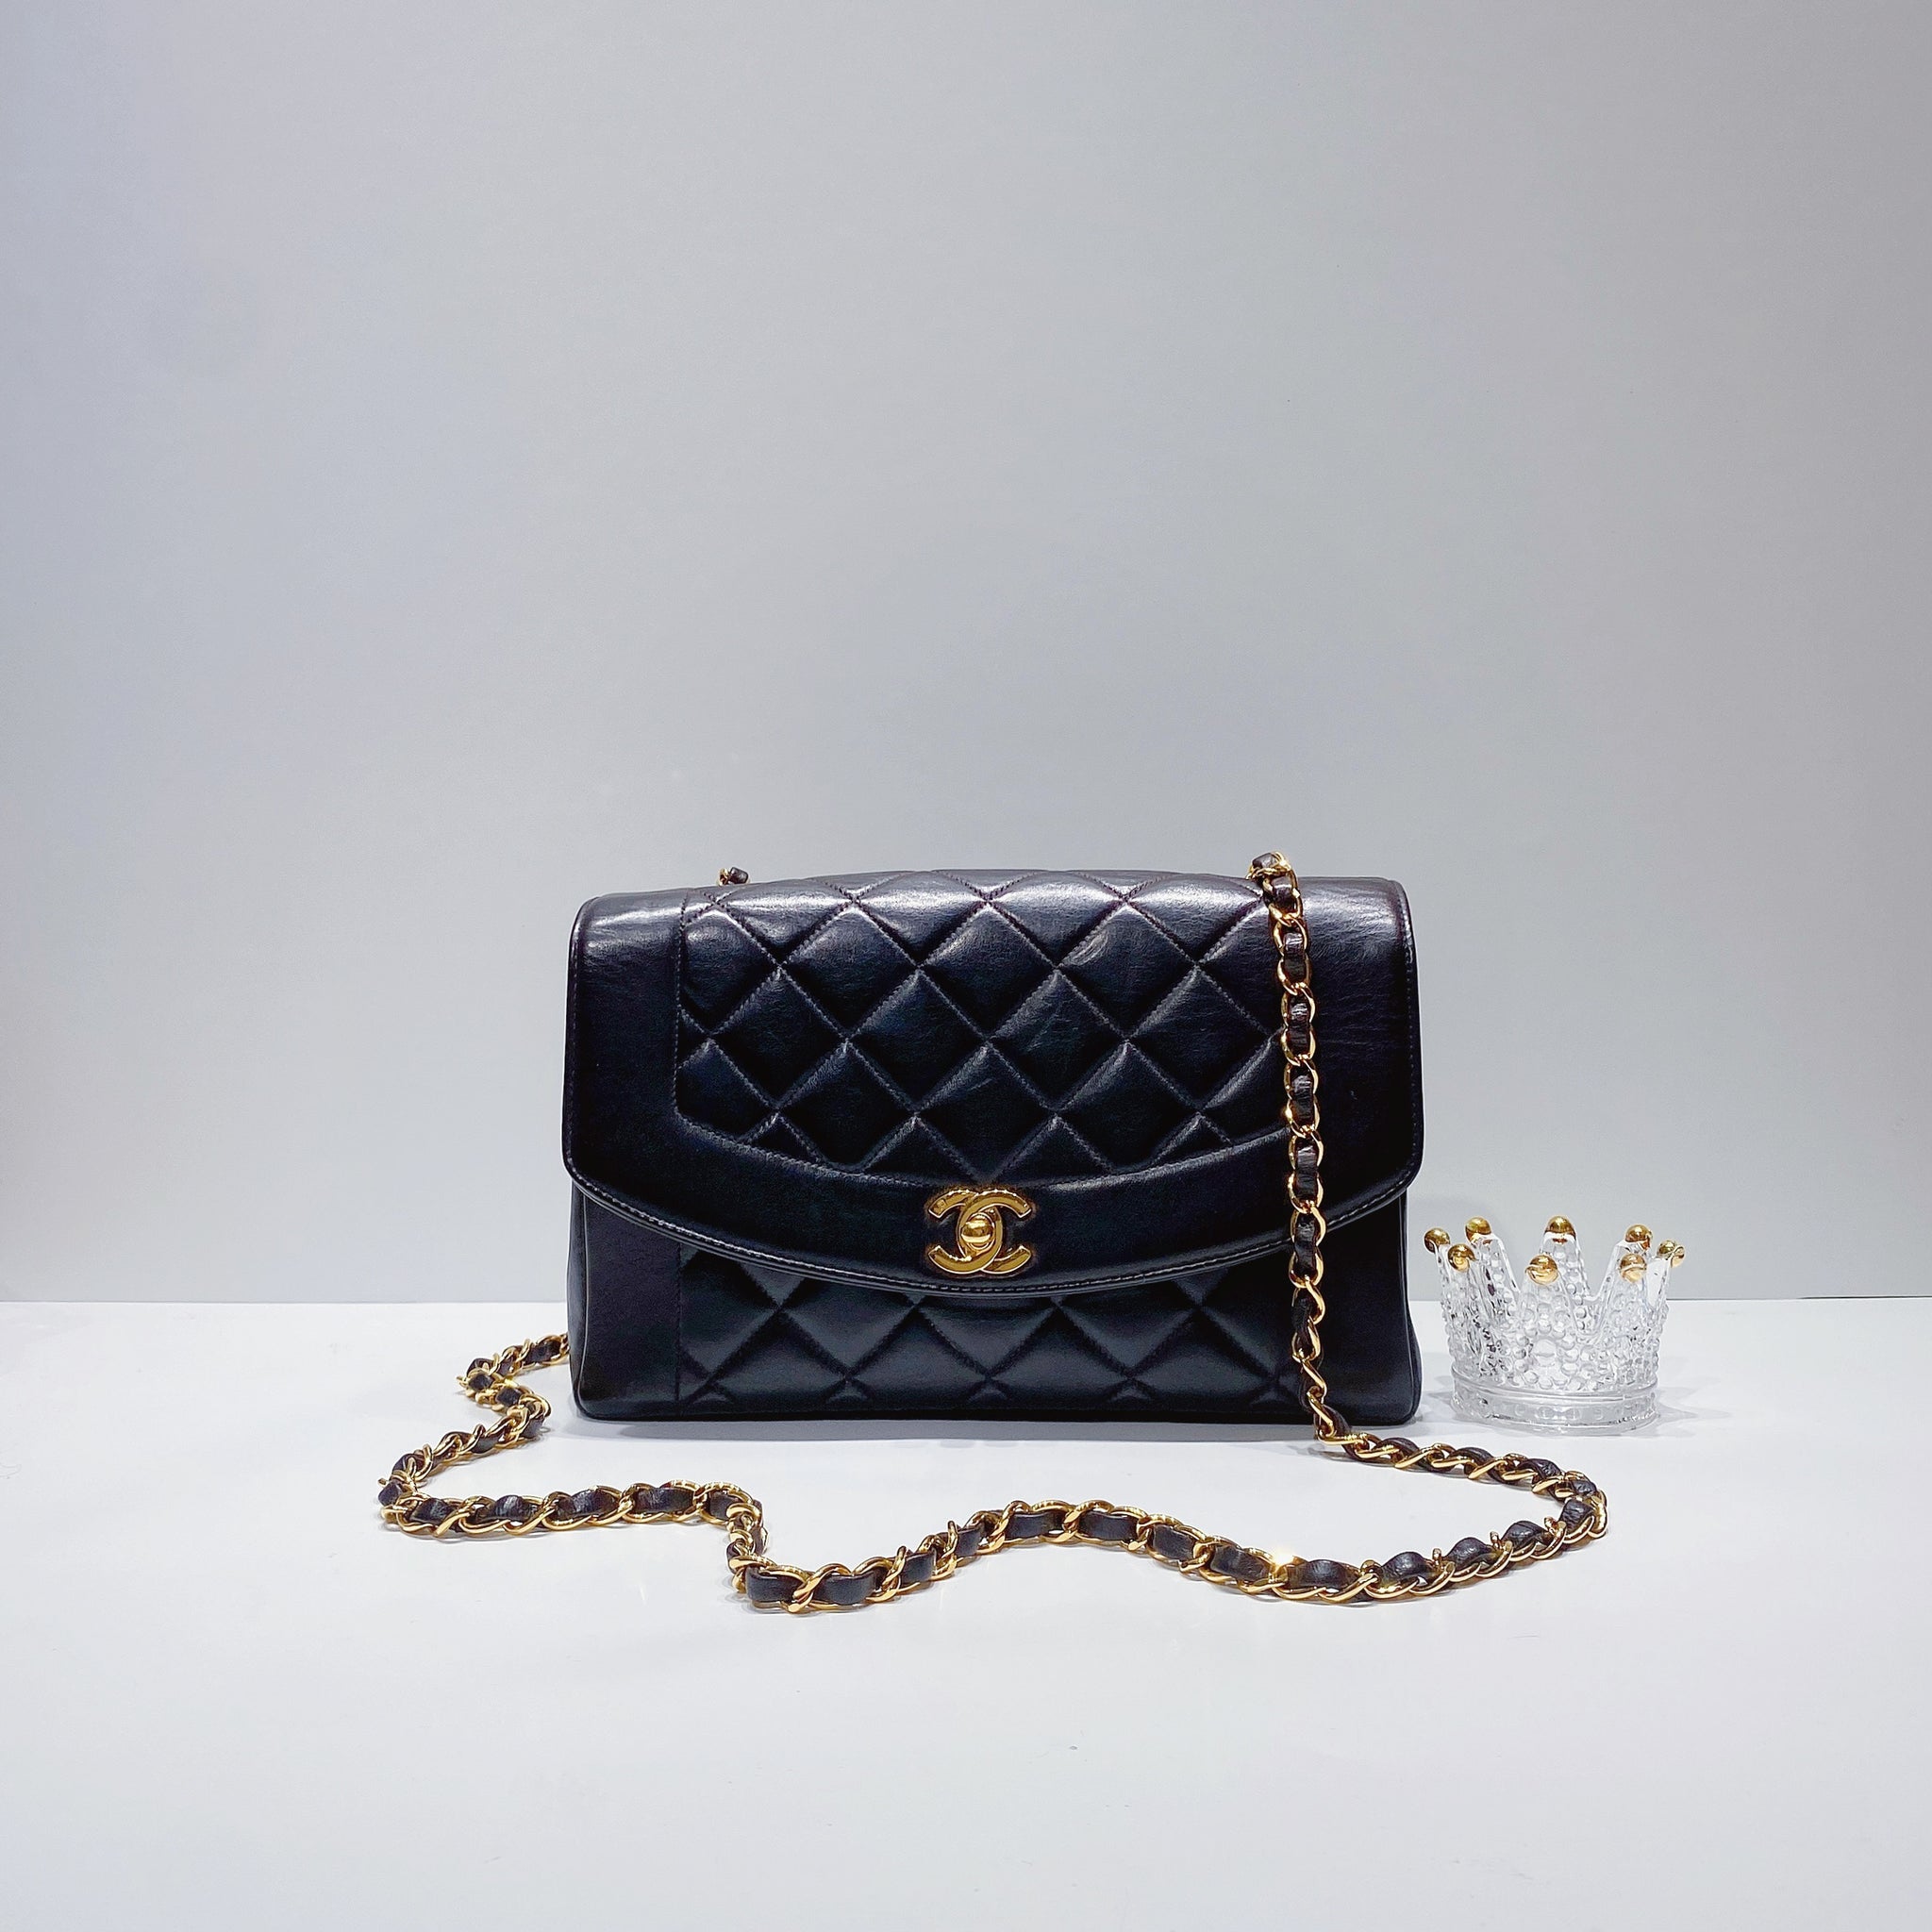 Chanel Black Quilted Lambskin Medium Vintage Classic Diana Flap Bag Chanel   TLC